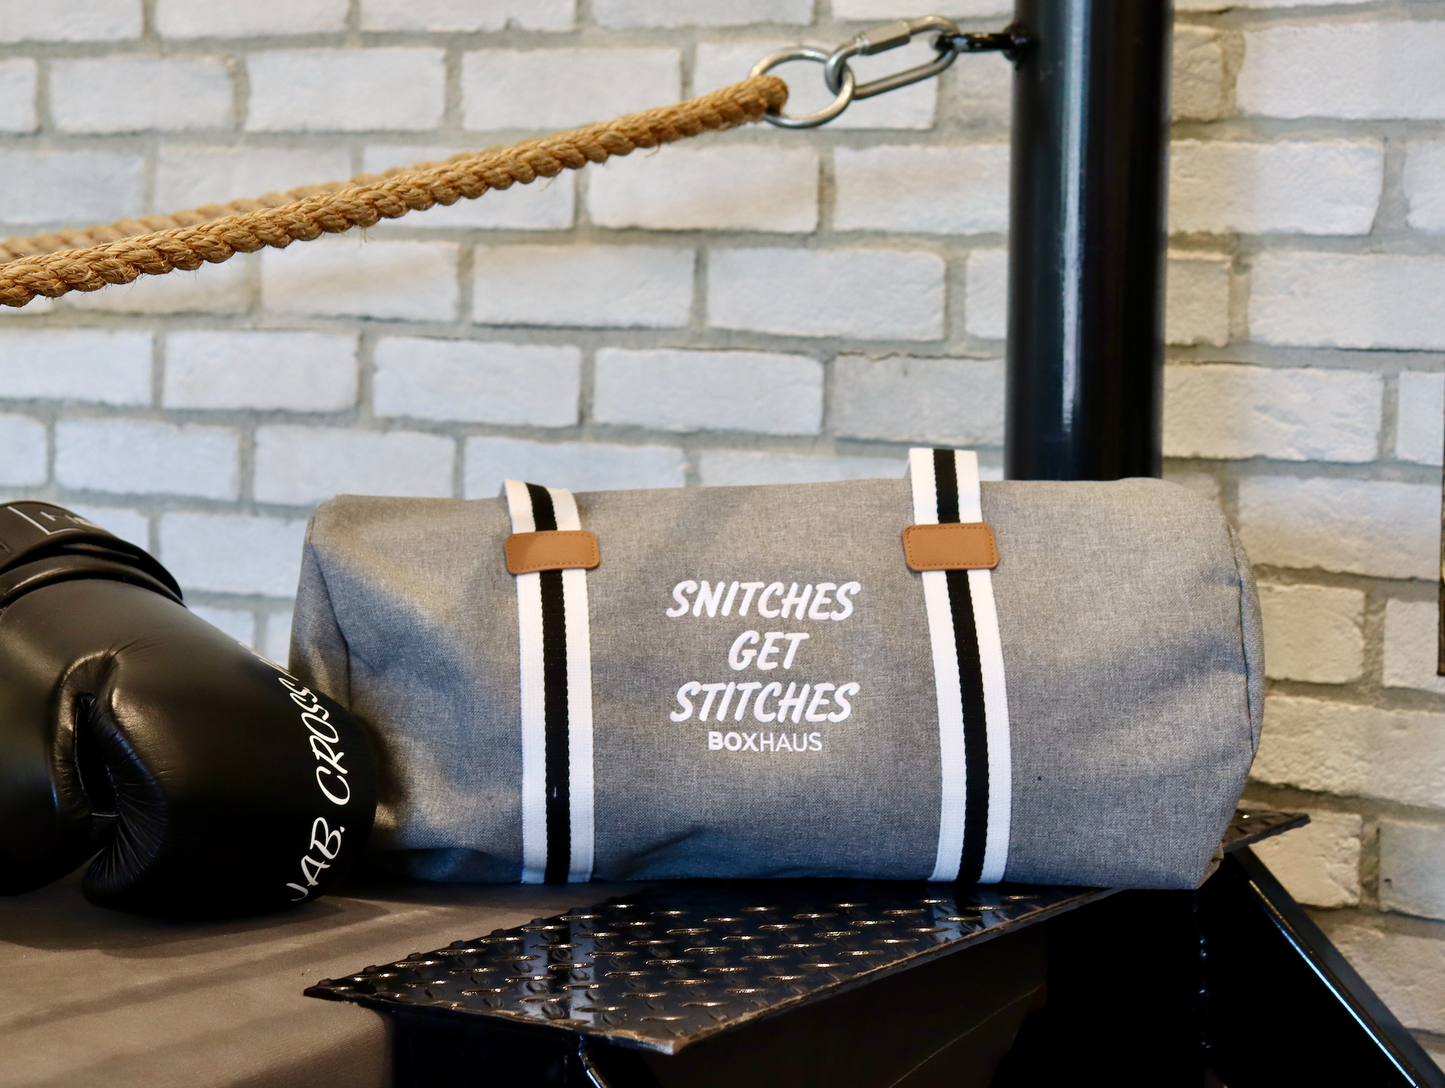 BOXHAUS- DUFFLE BAG SNITCHES GET STITCHES